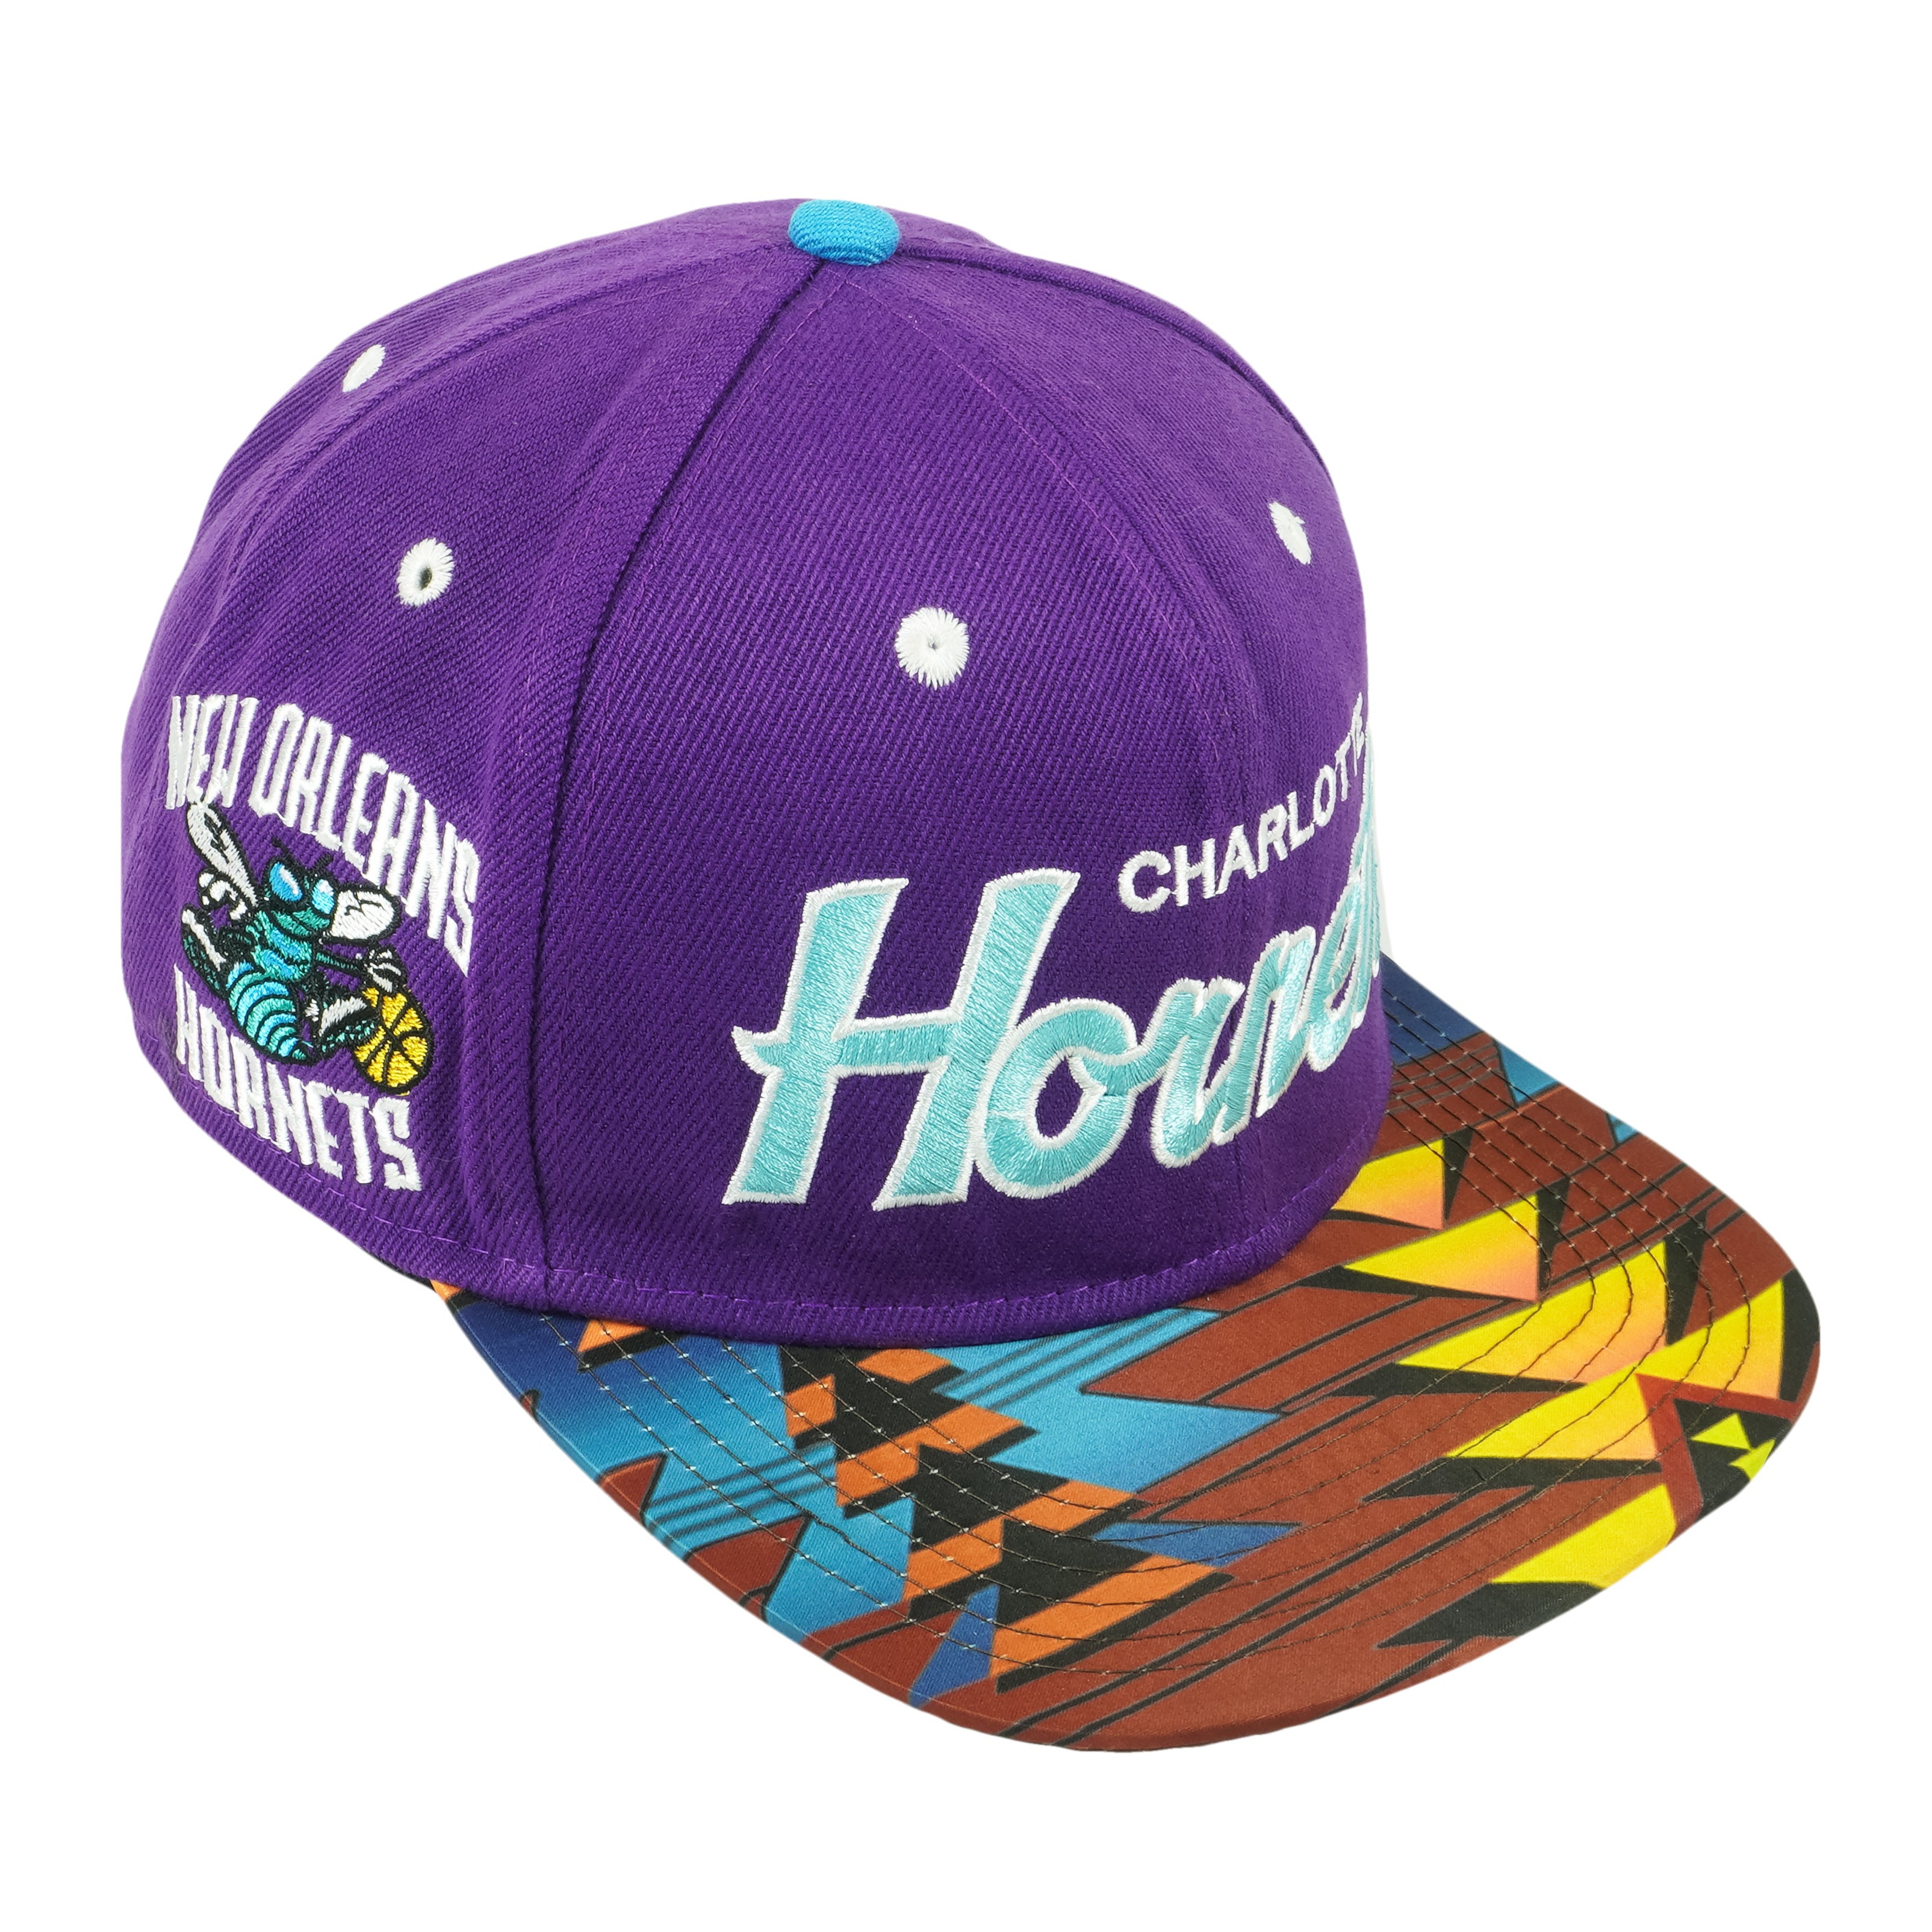 Vintage 90s Charlotte Hornets NBA Embroidered white Leather Snapback Hat